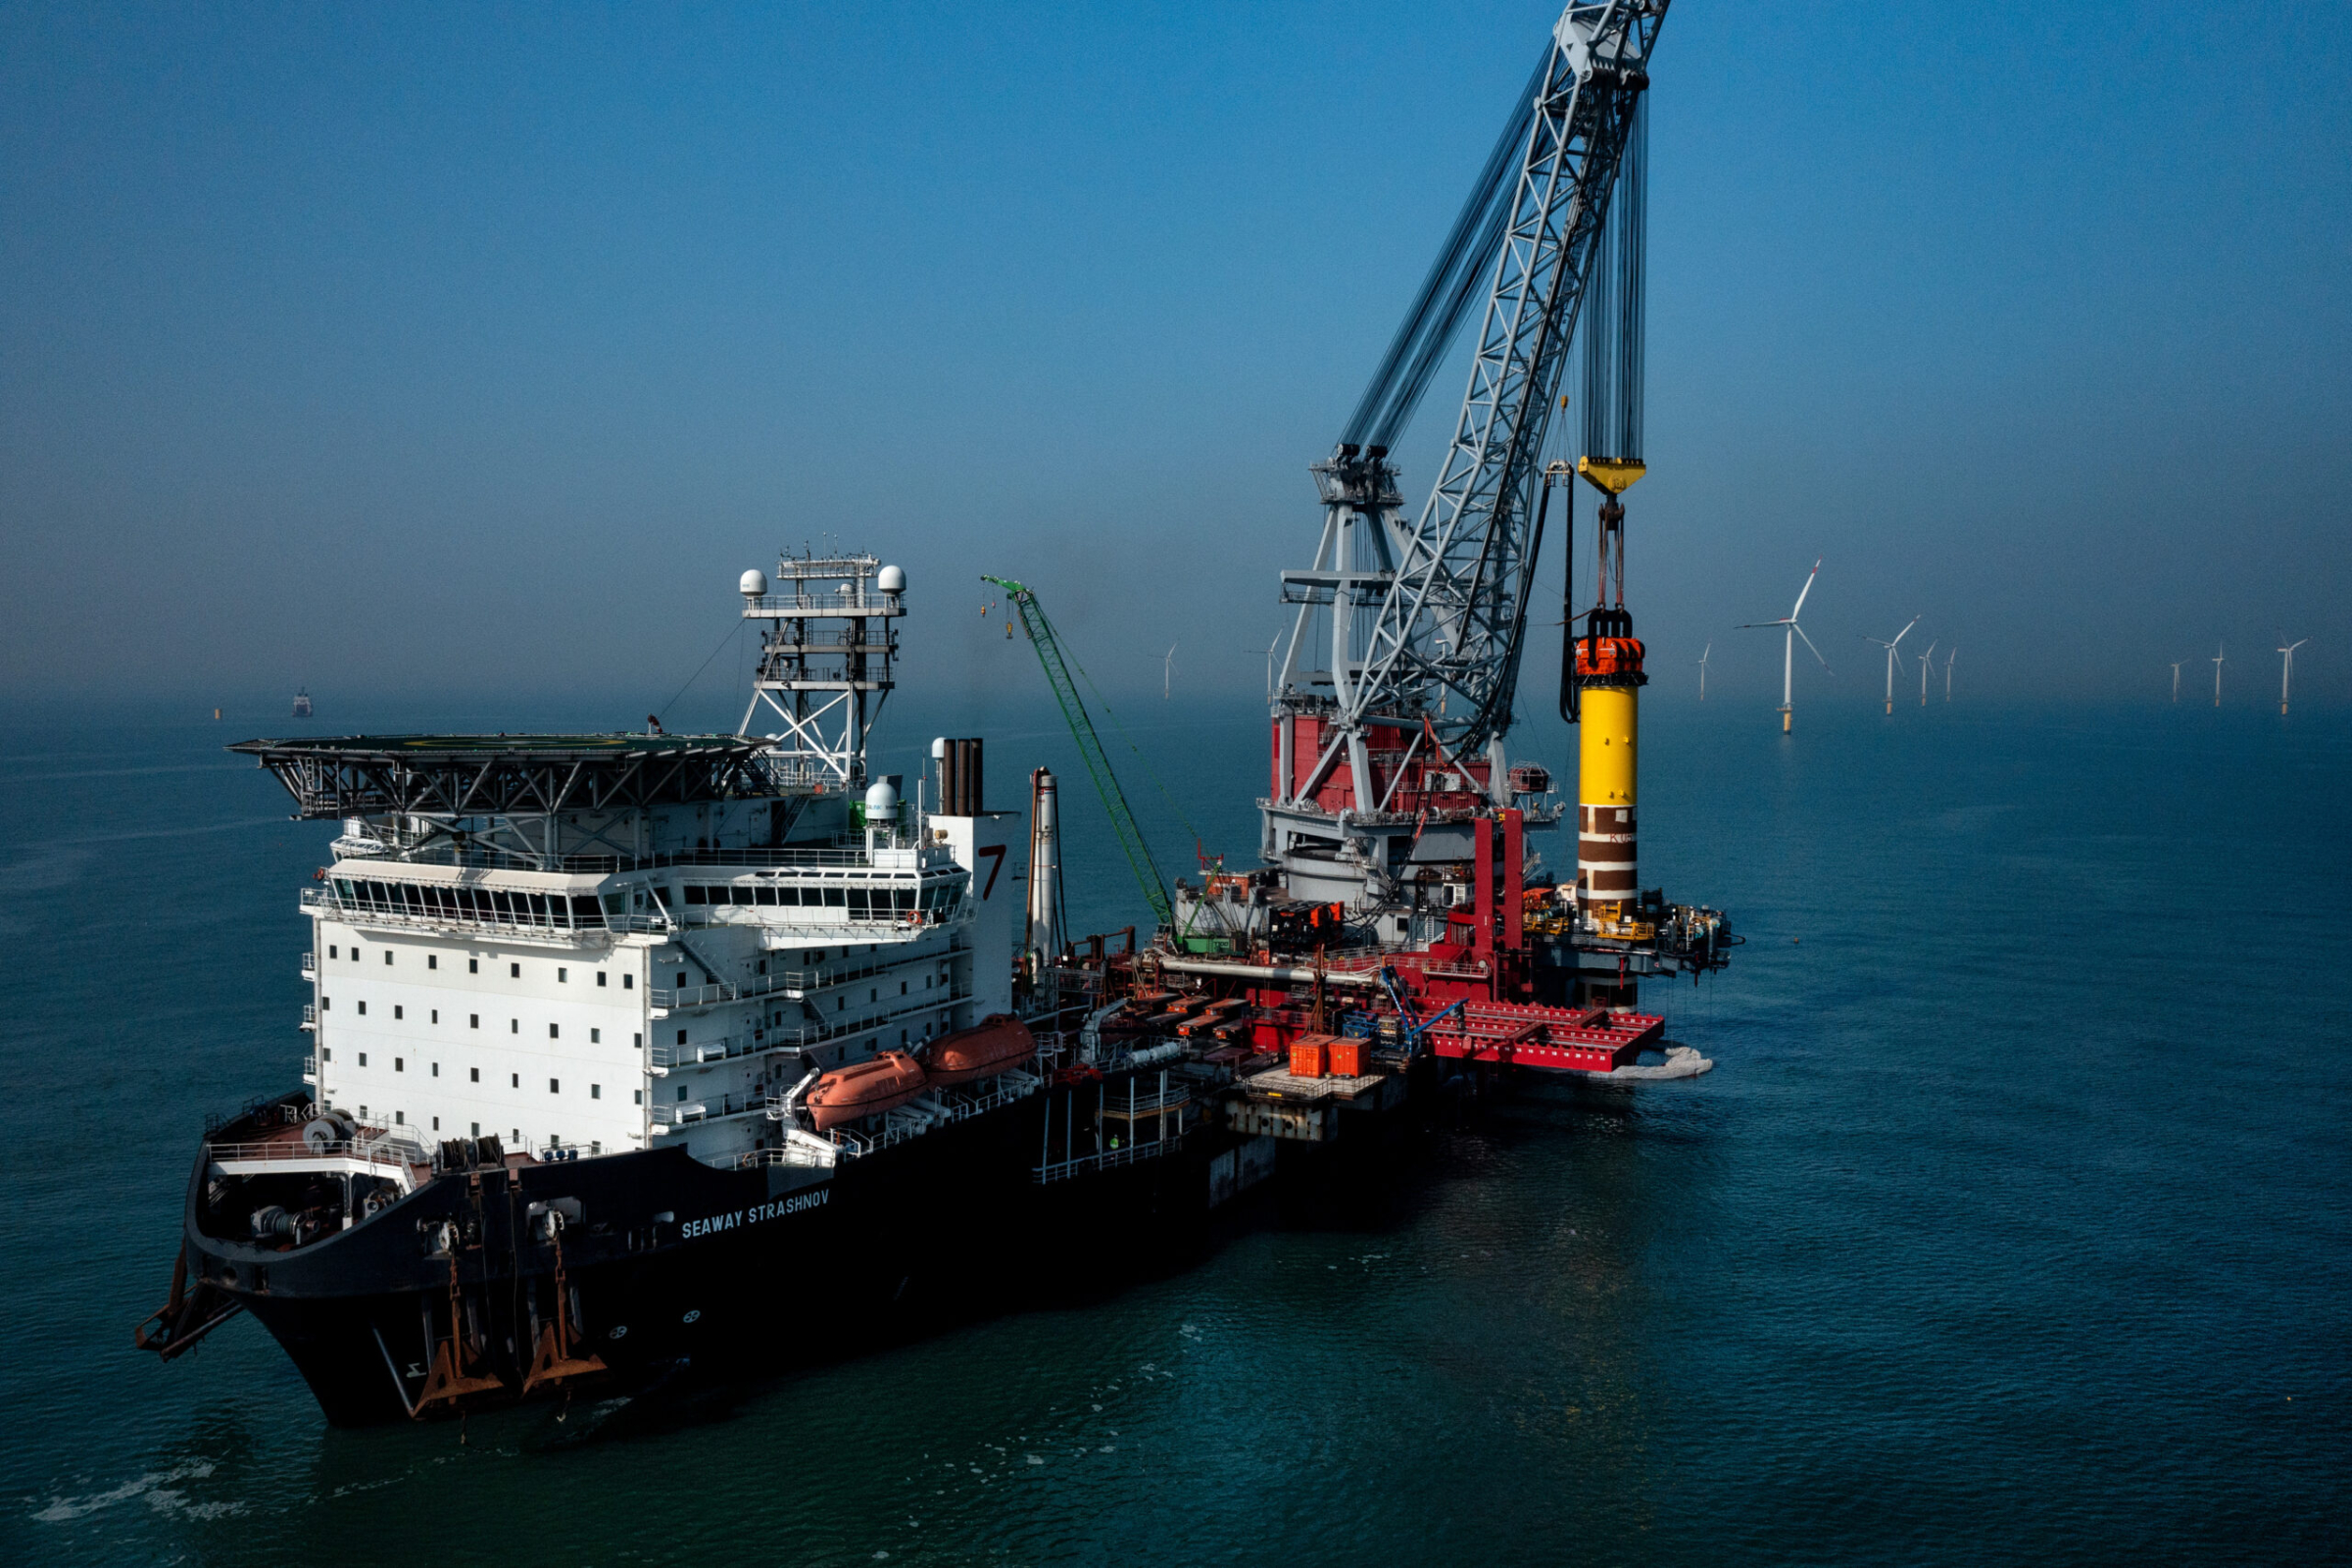 CAPE Holland’s VLT completed its work at Kaskasi II OWF